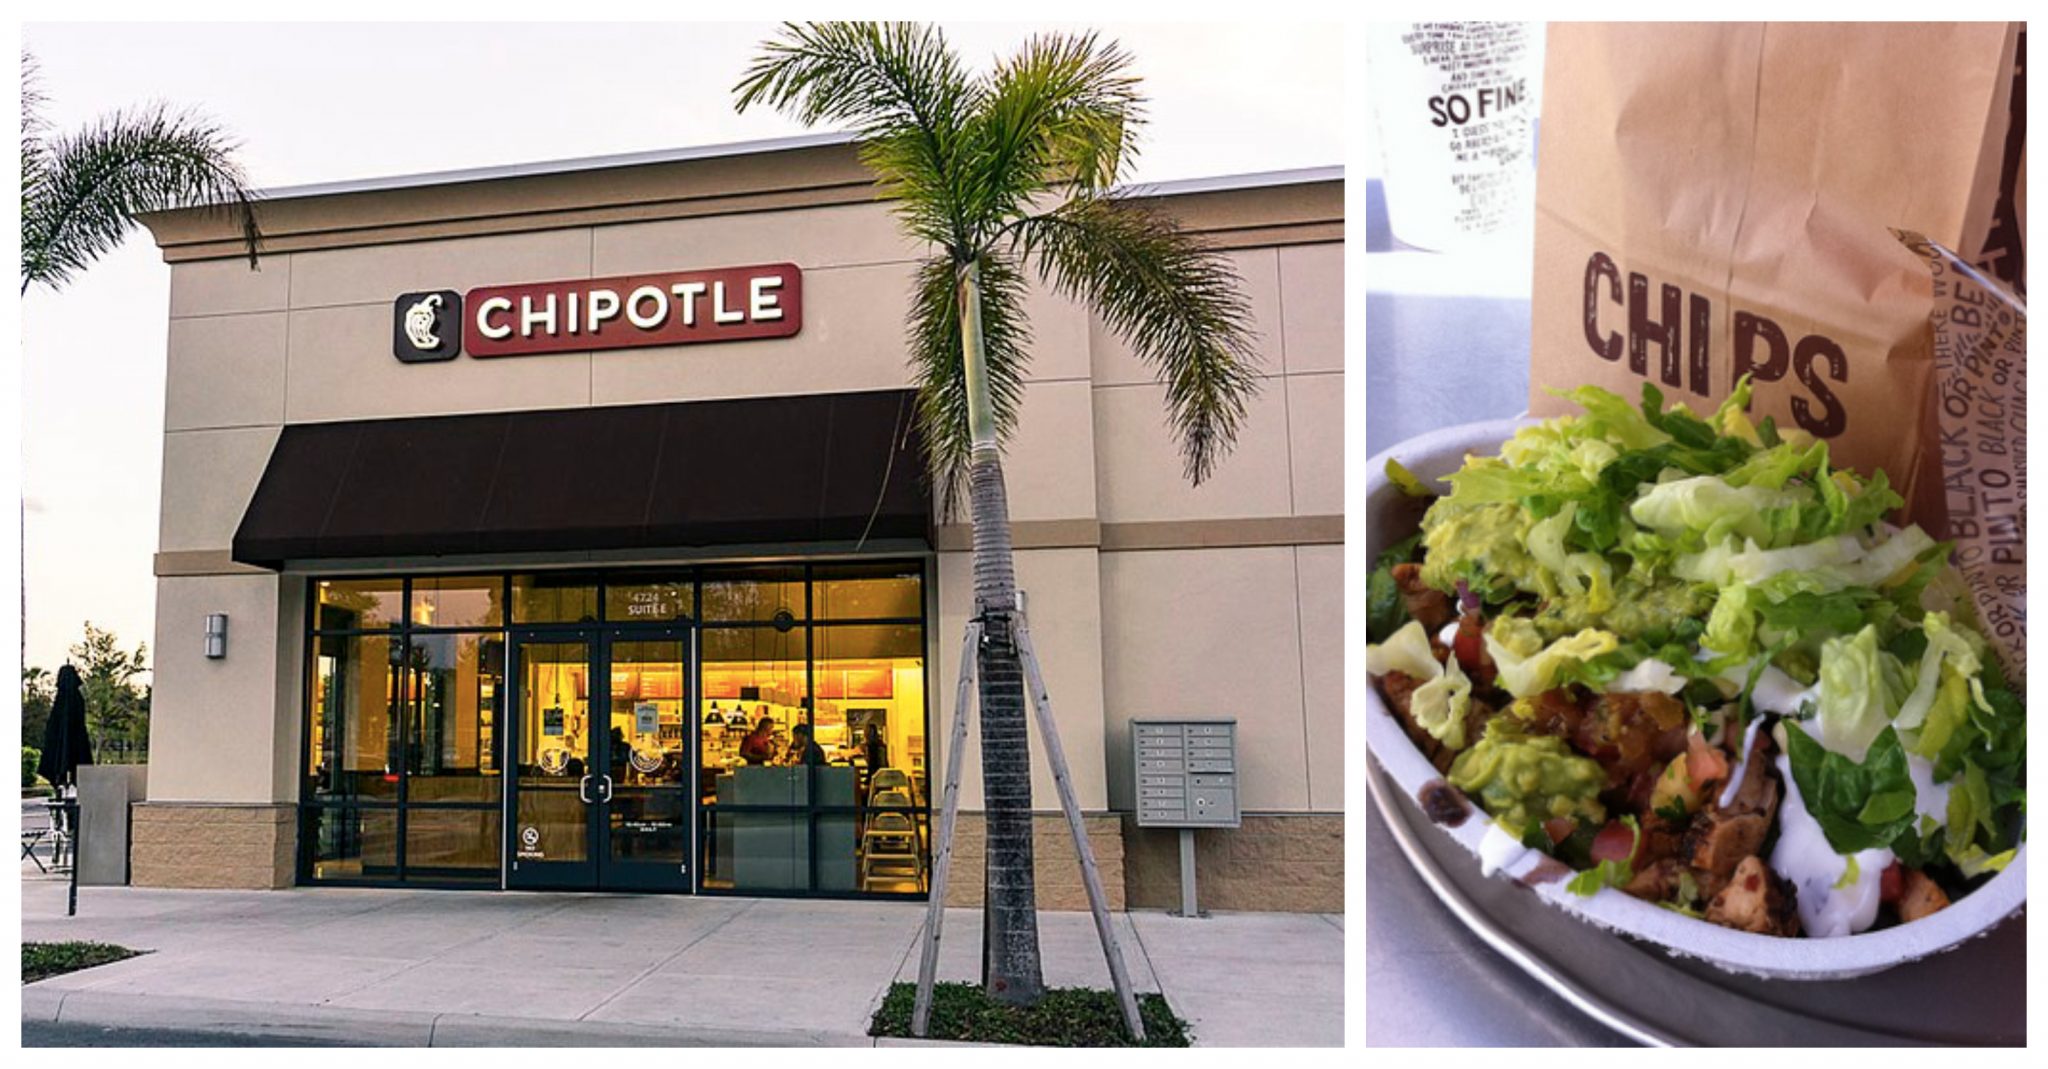 Chipotle Is Experiencing Its Worst Food Poisoning Outbreak Yet